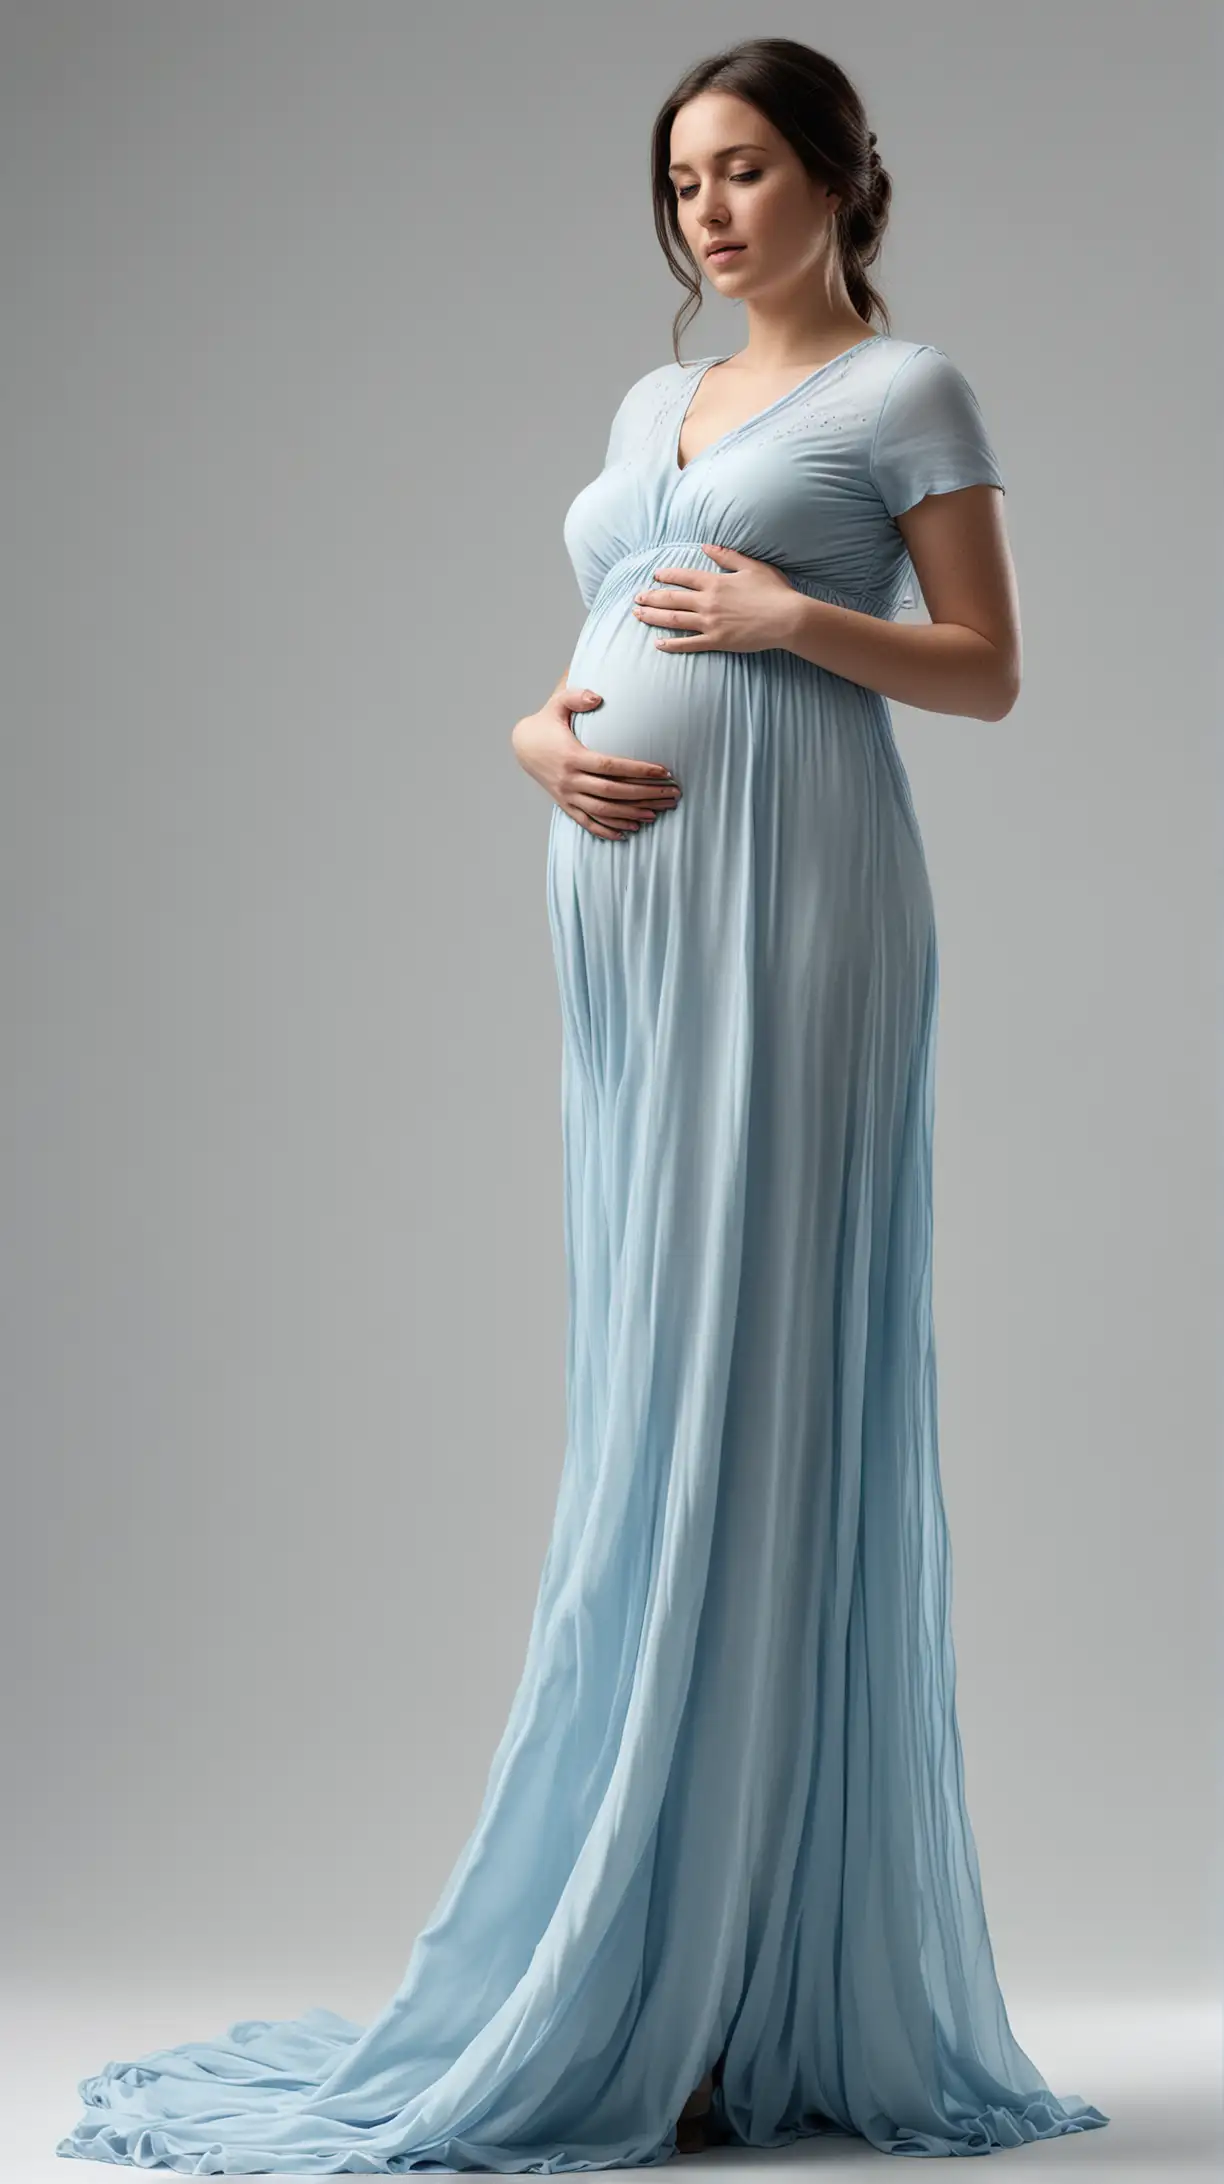 Hyper realistic professional studio photo of a pregnant woman on a white background with a light blue flowing dress